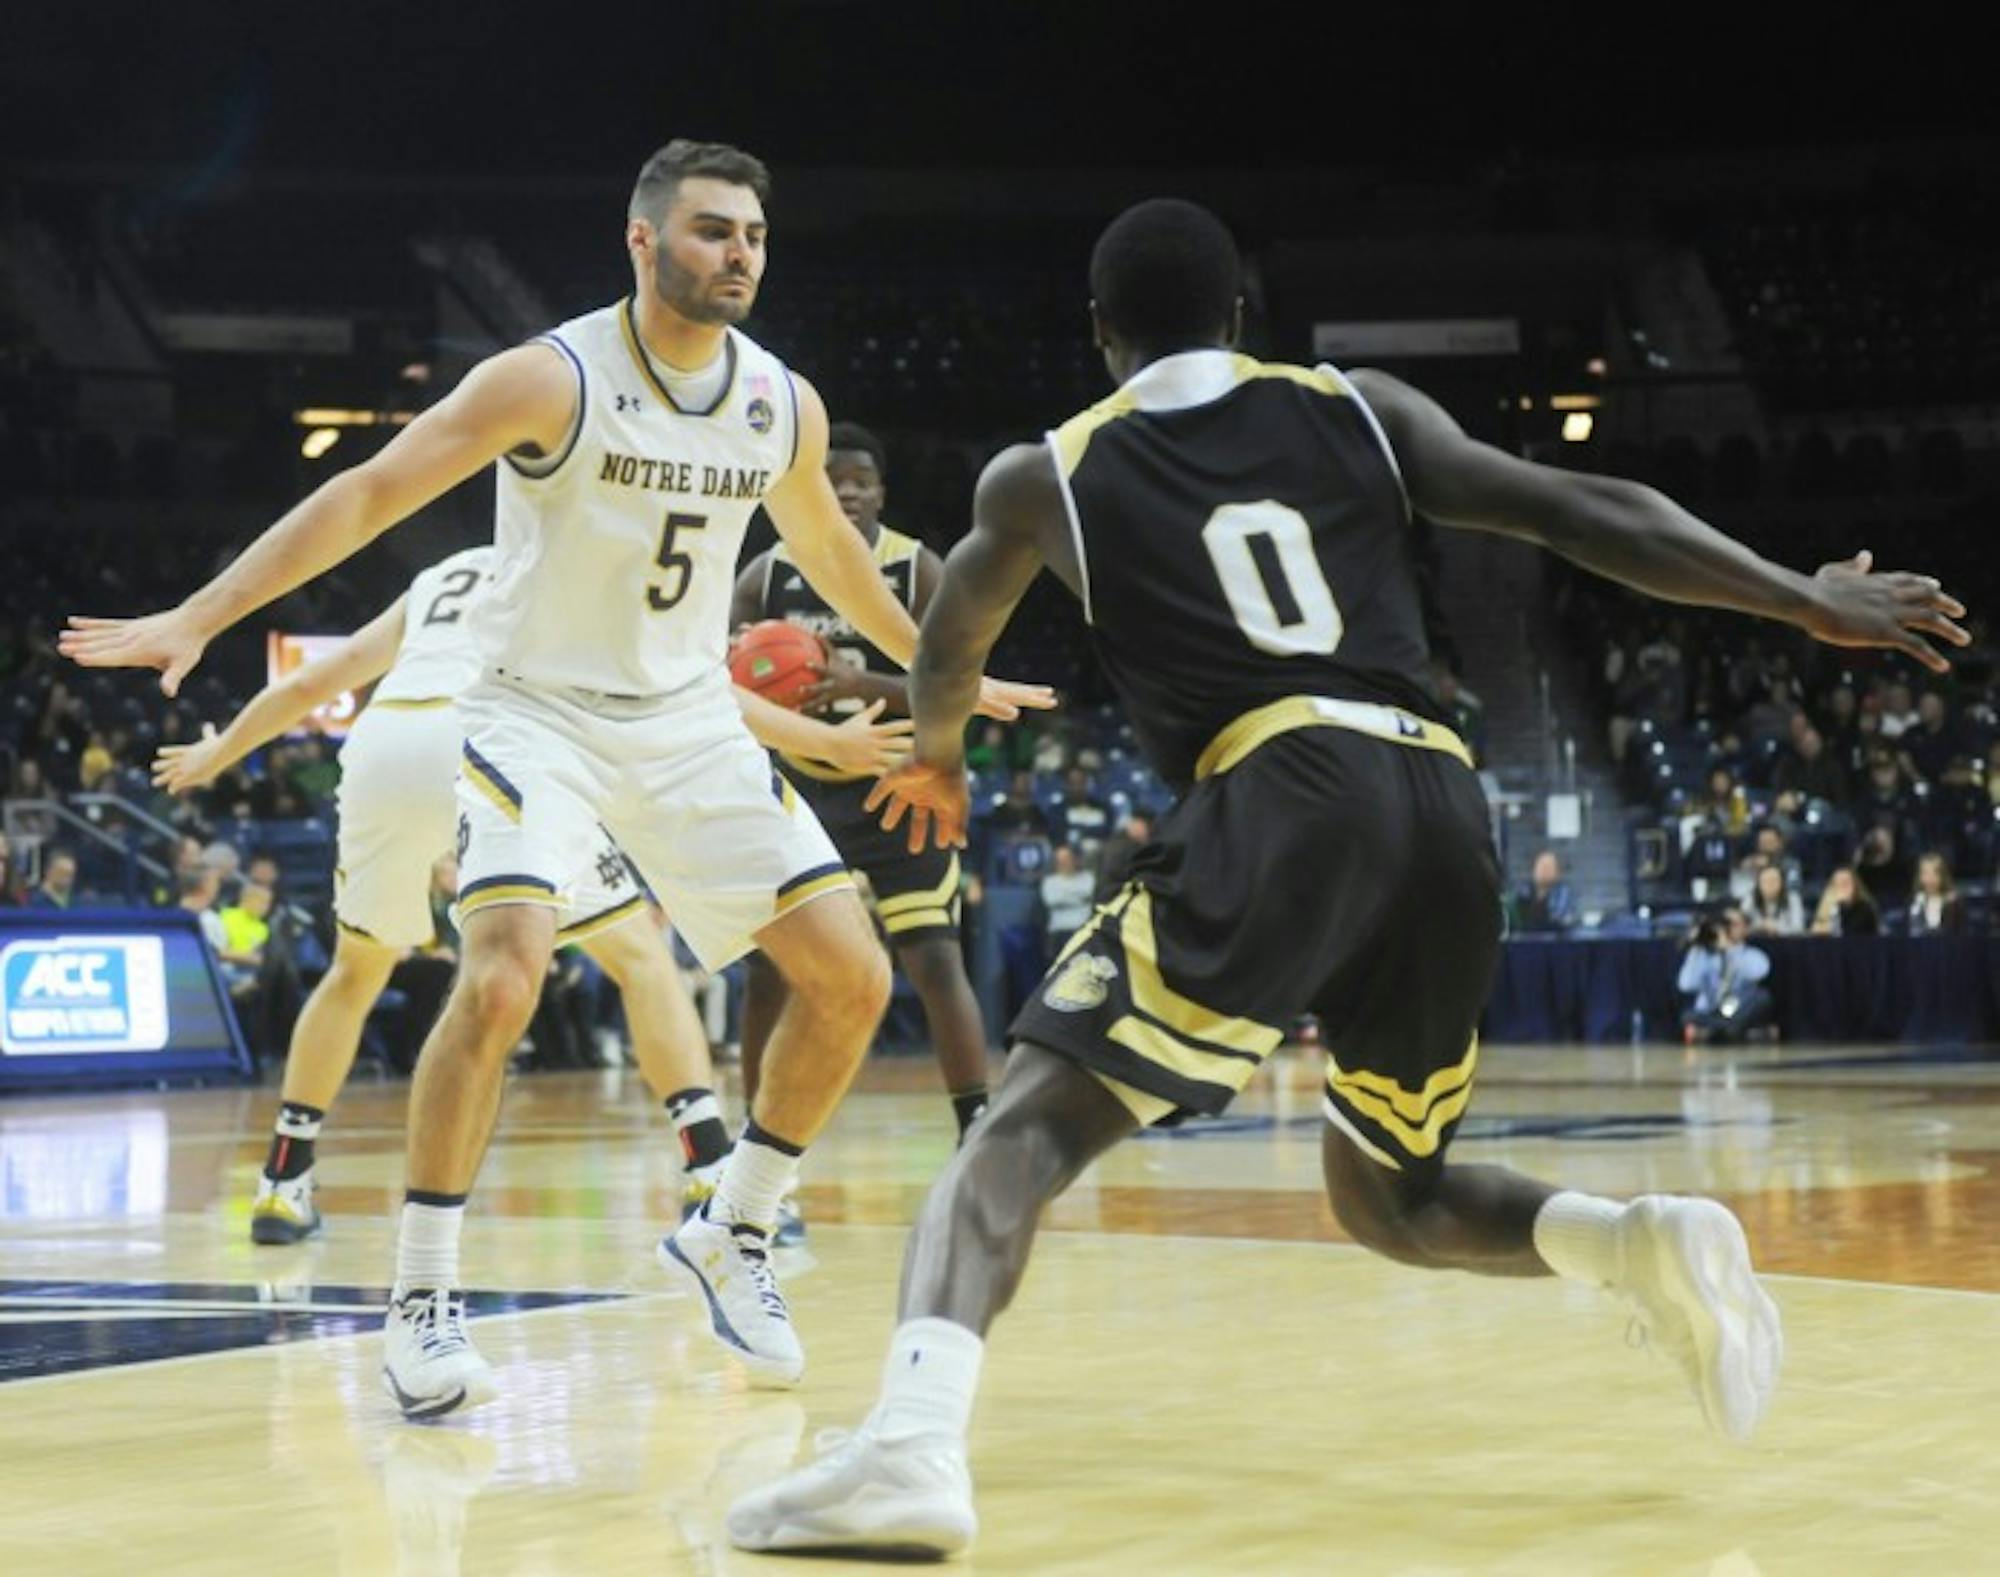 Notre Dame junior guard Matt Farrell, who was named MVP of the Legends Classic after scoring a game-winning shot, plays defense during an 89-64 victory over Bryant on Nov. 12 at Purcell Pavilion.